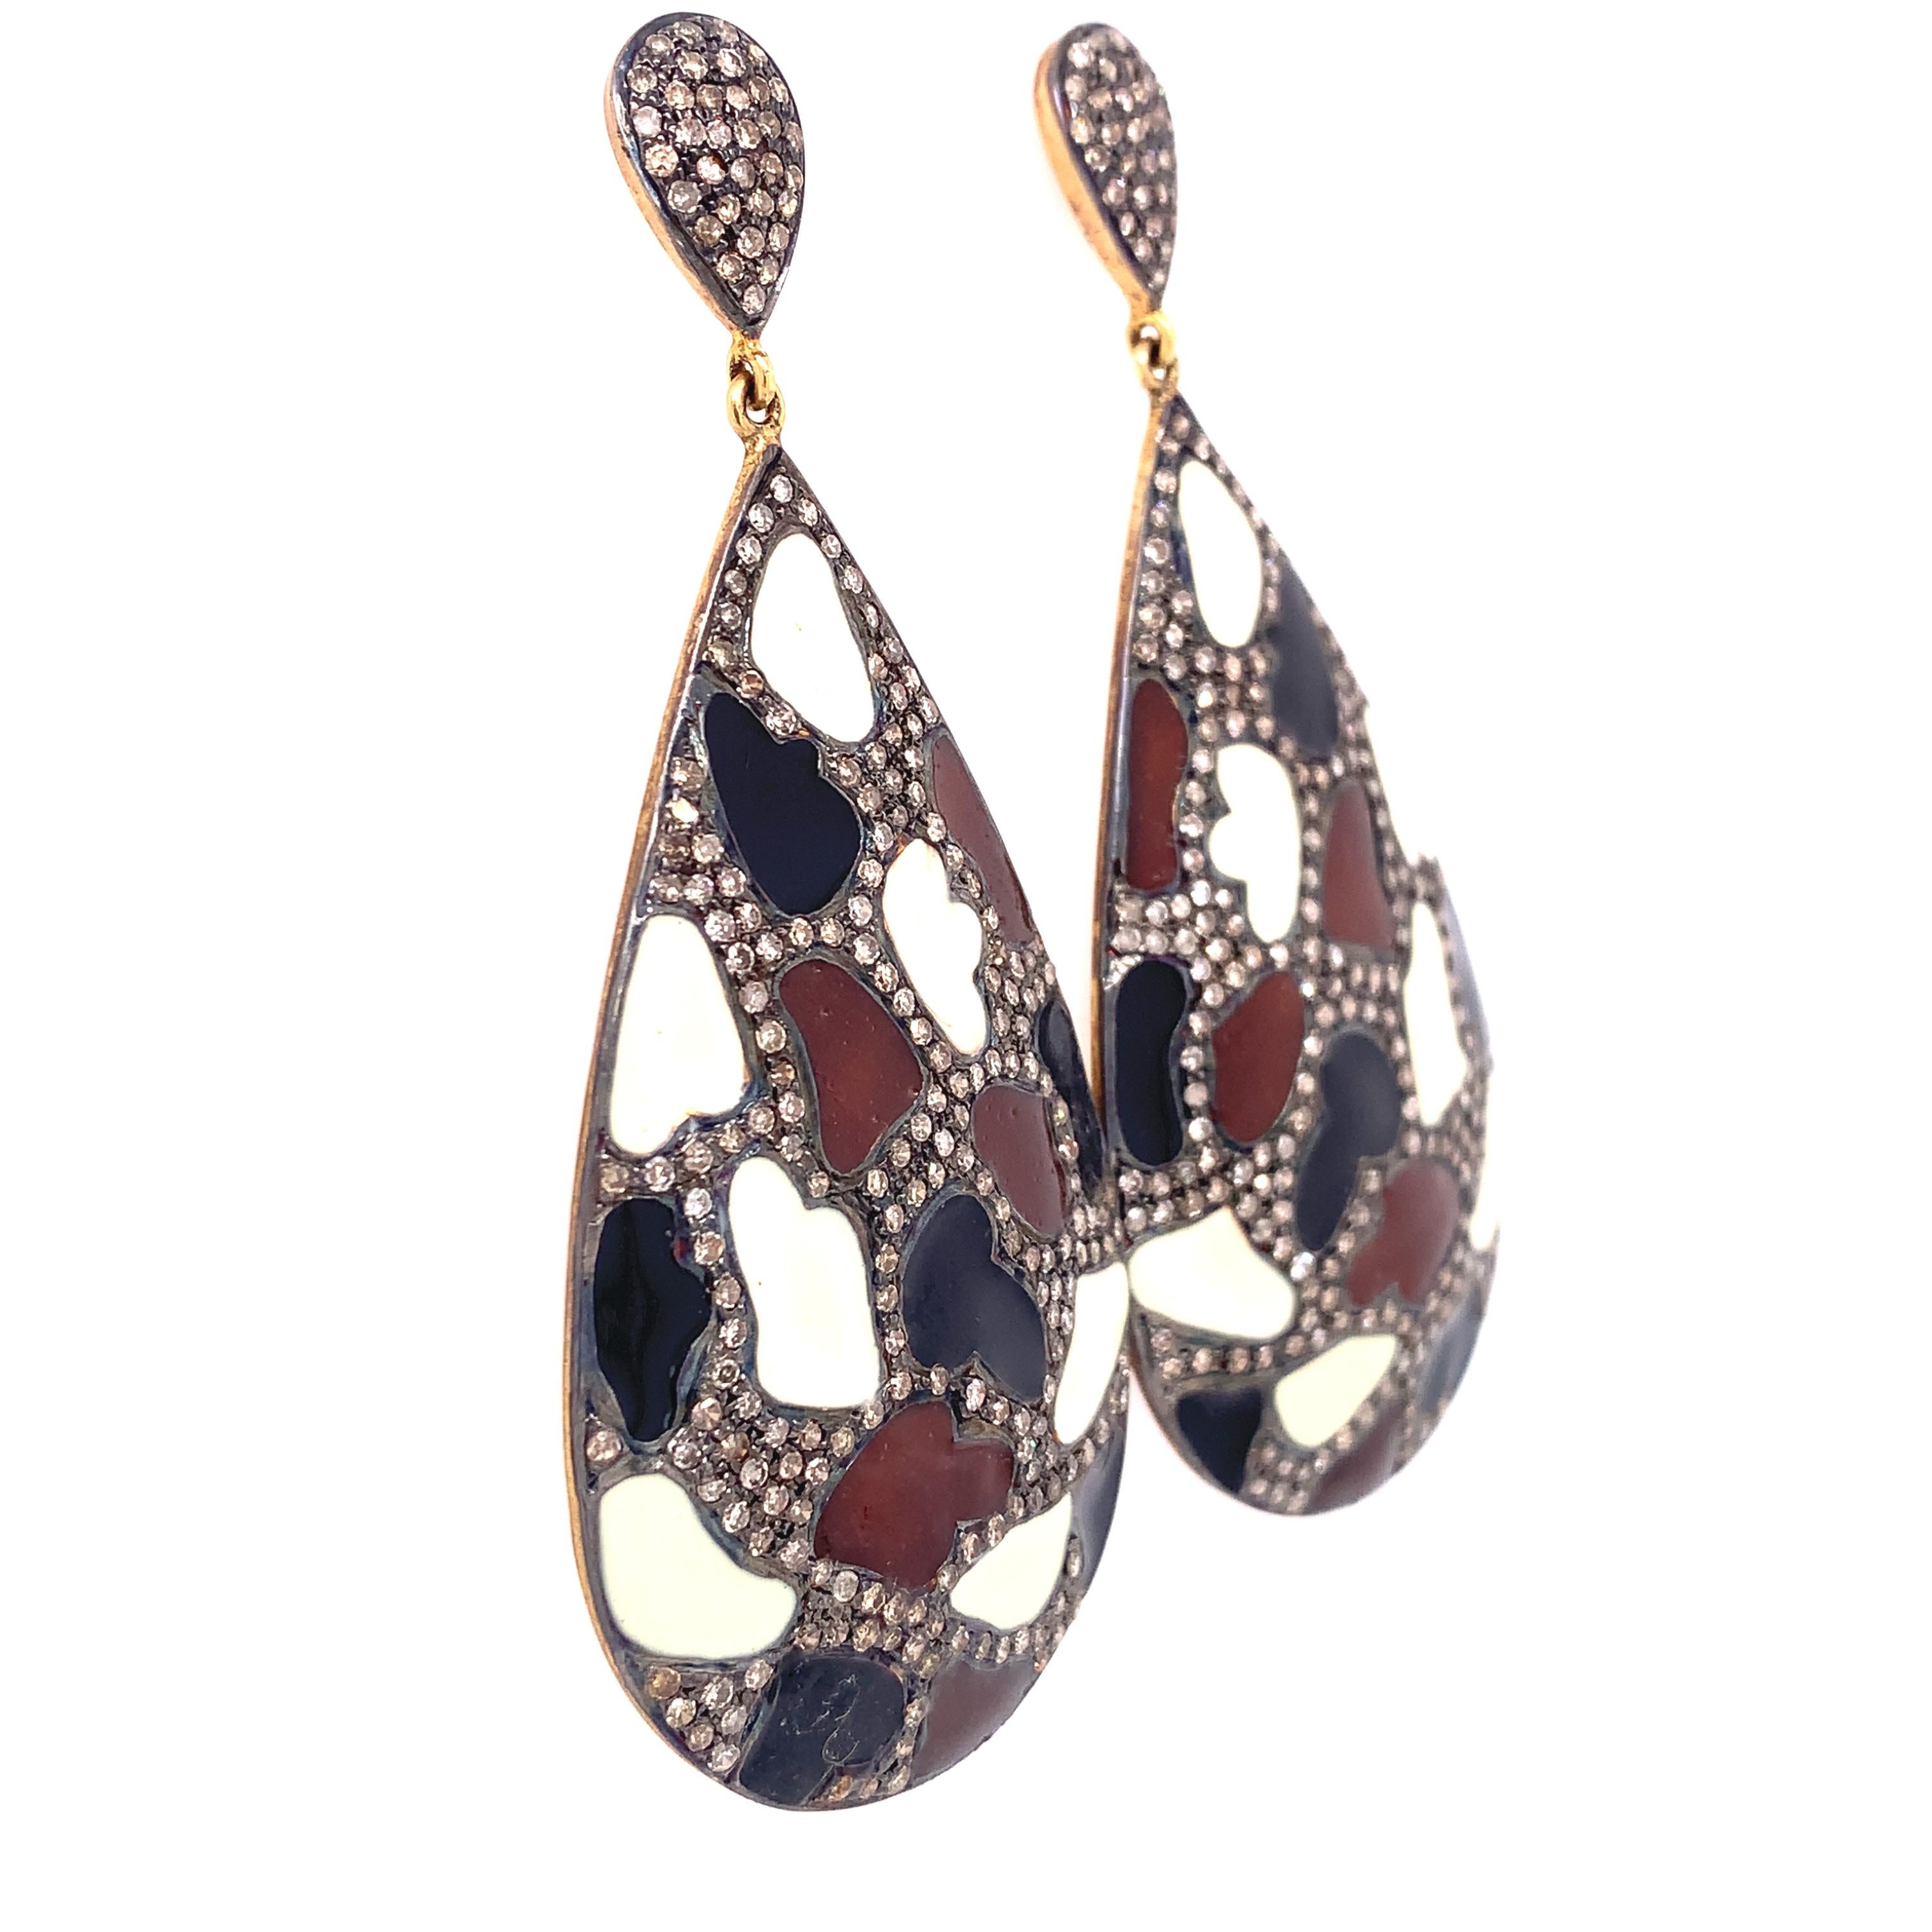 Contemporary Lucea New York Rustic Diamond and Enamel Earrings For Sale